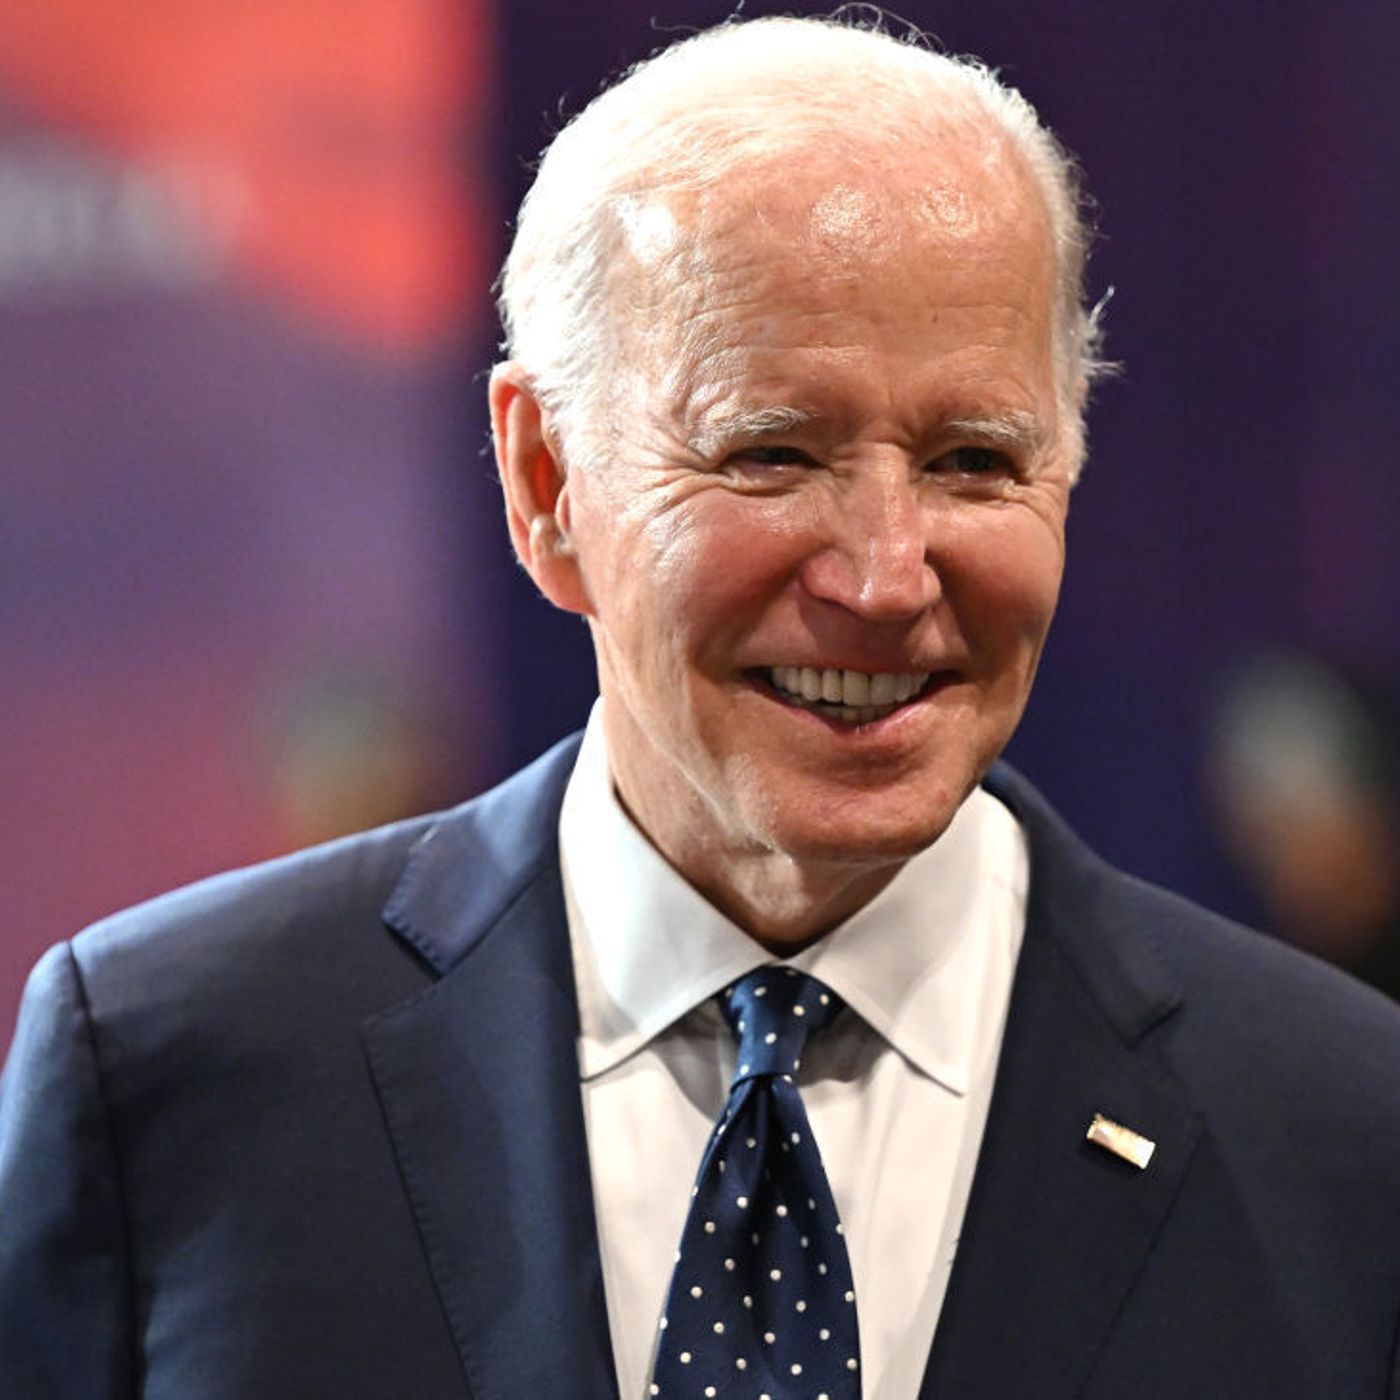 What do the midterm results mean for Biden?